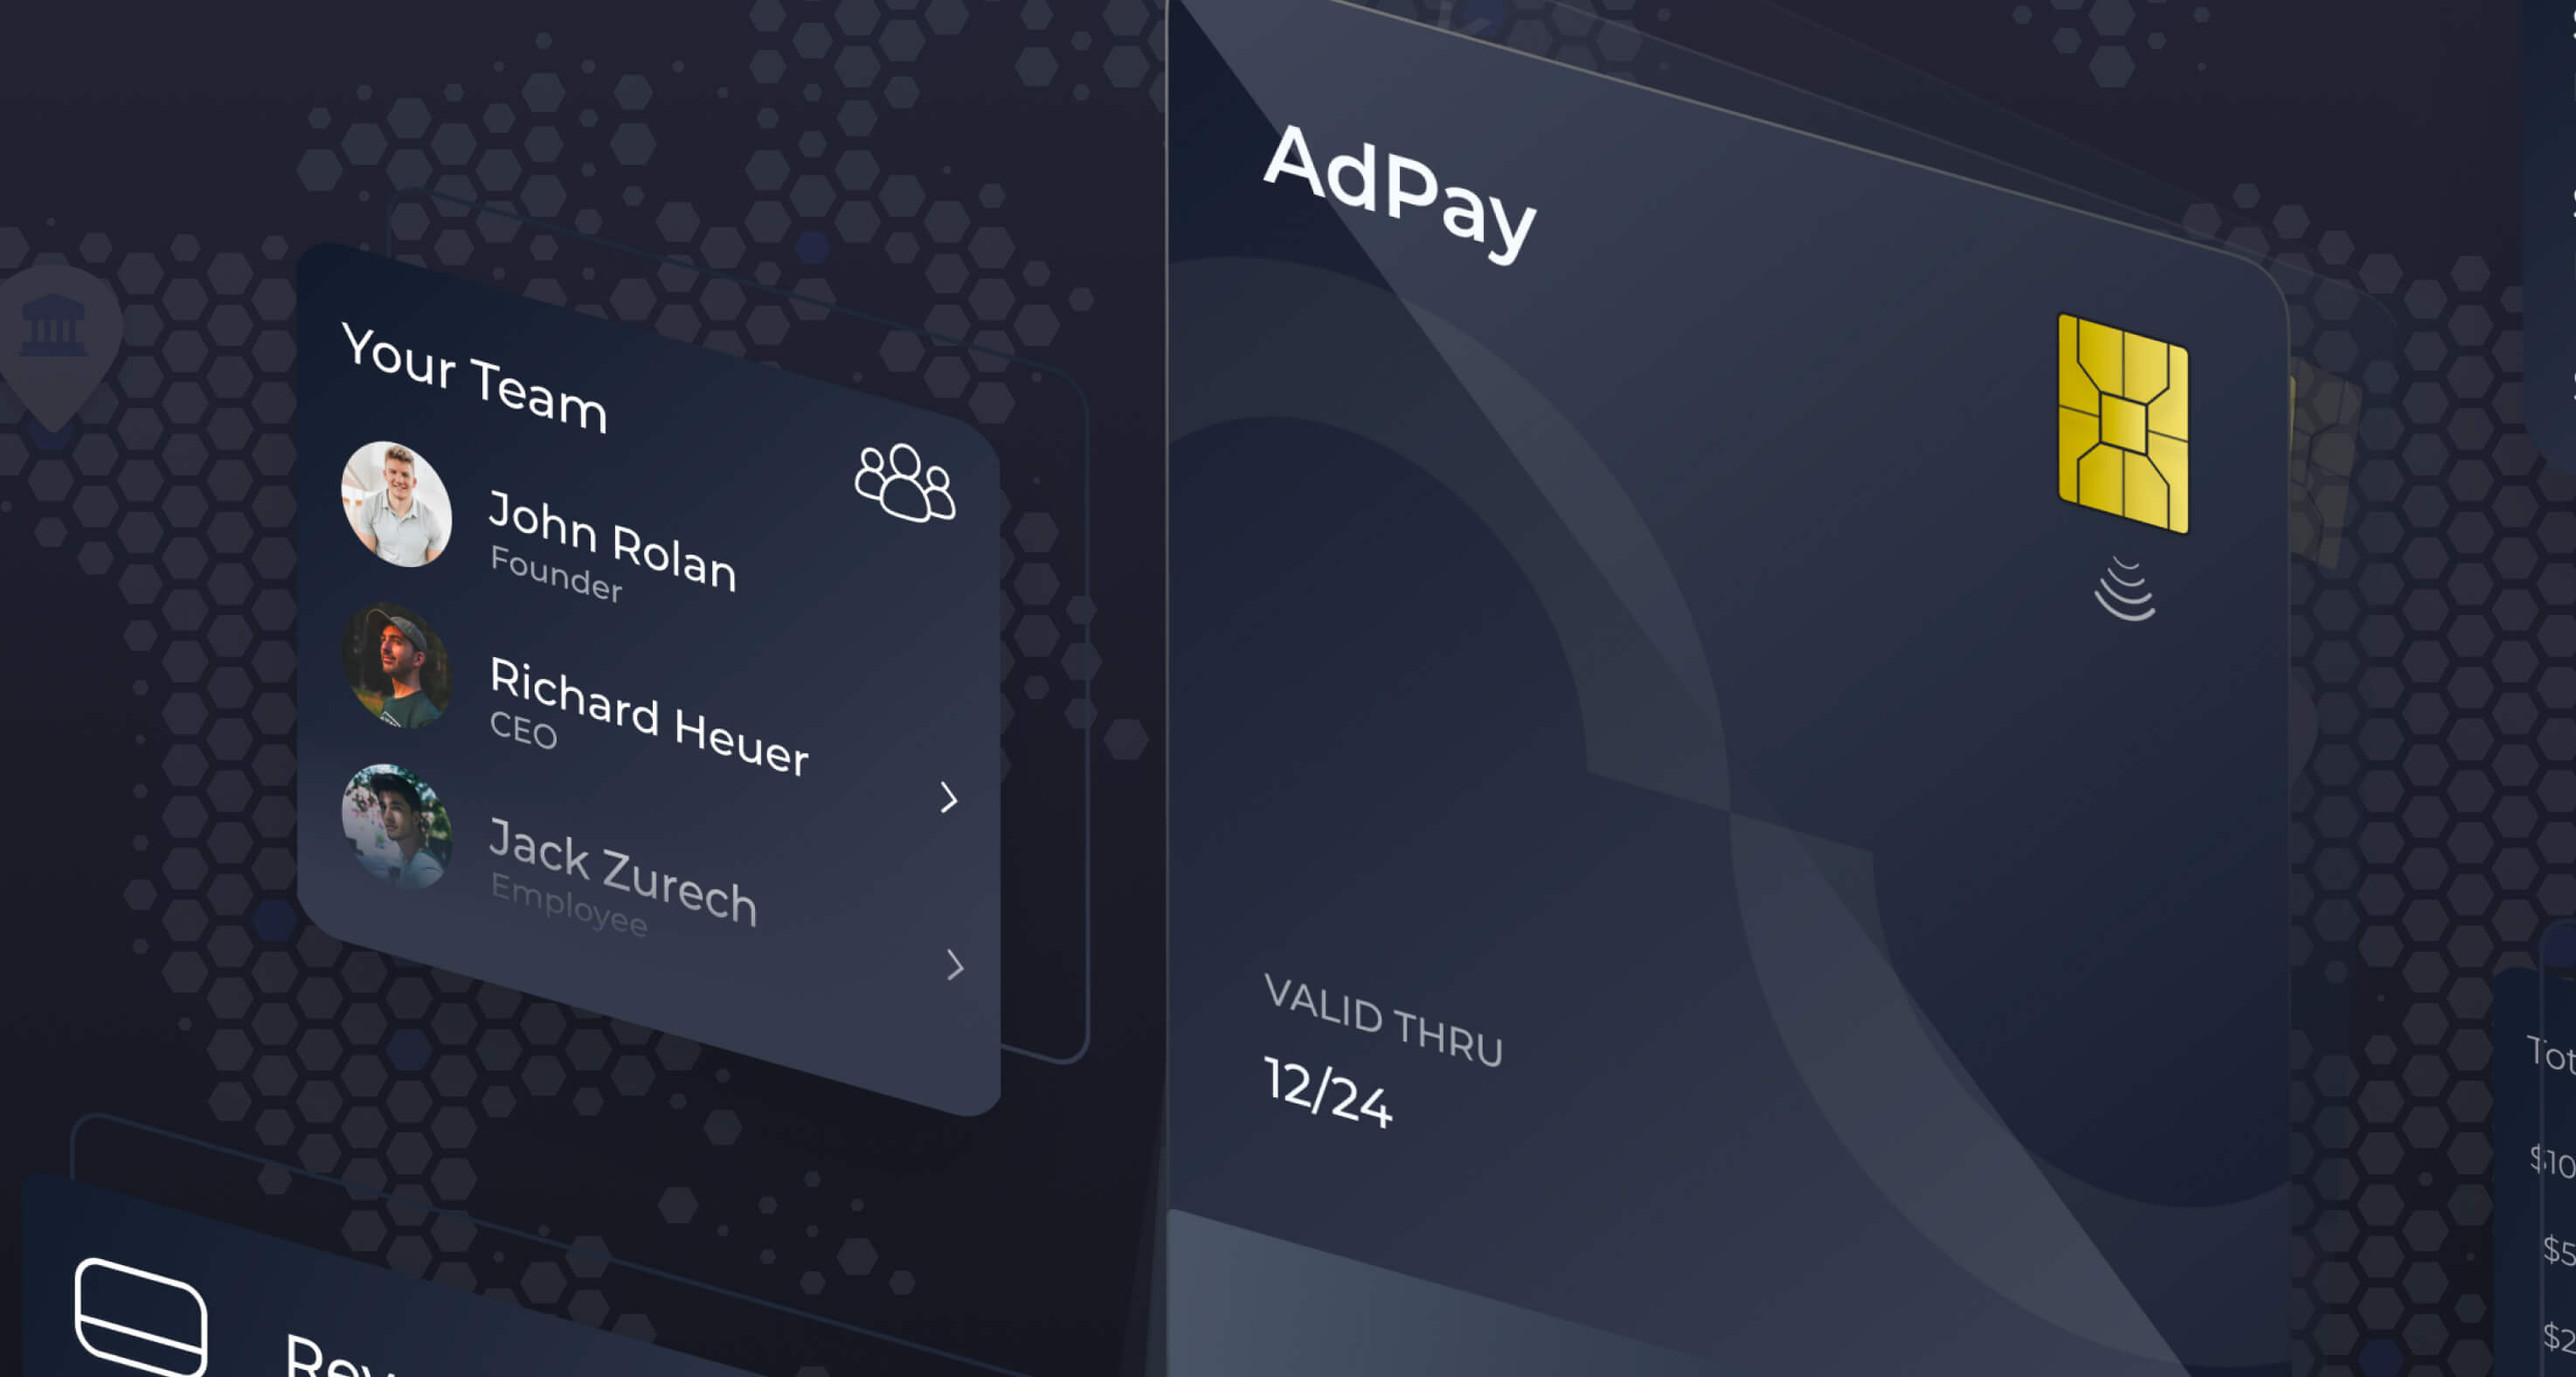 For Device Adpay